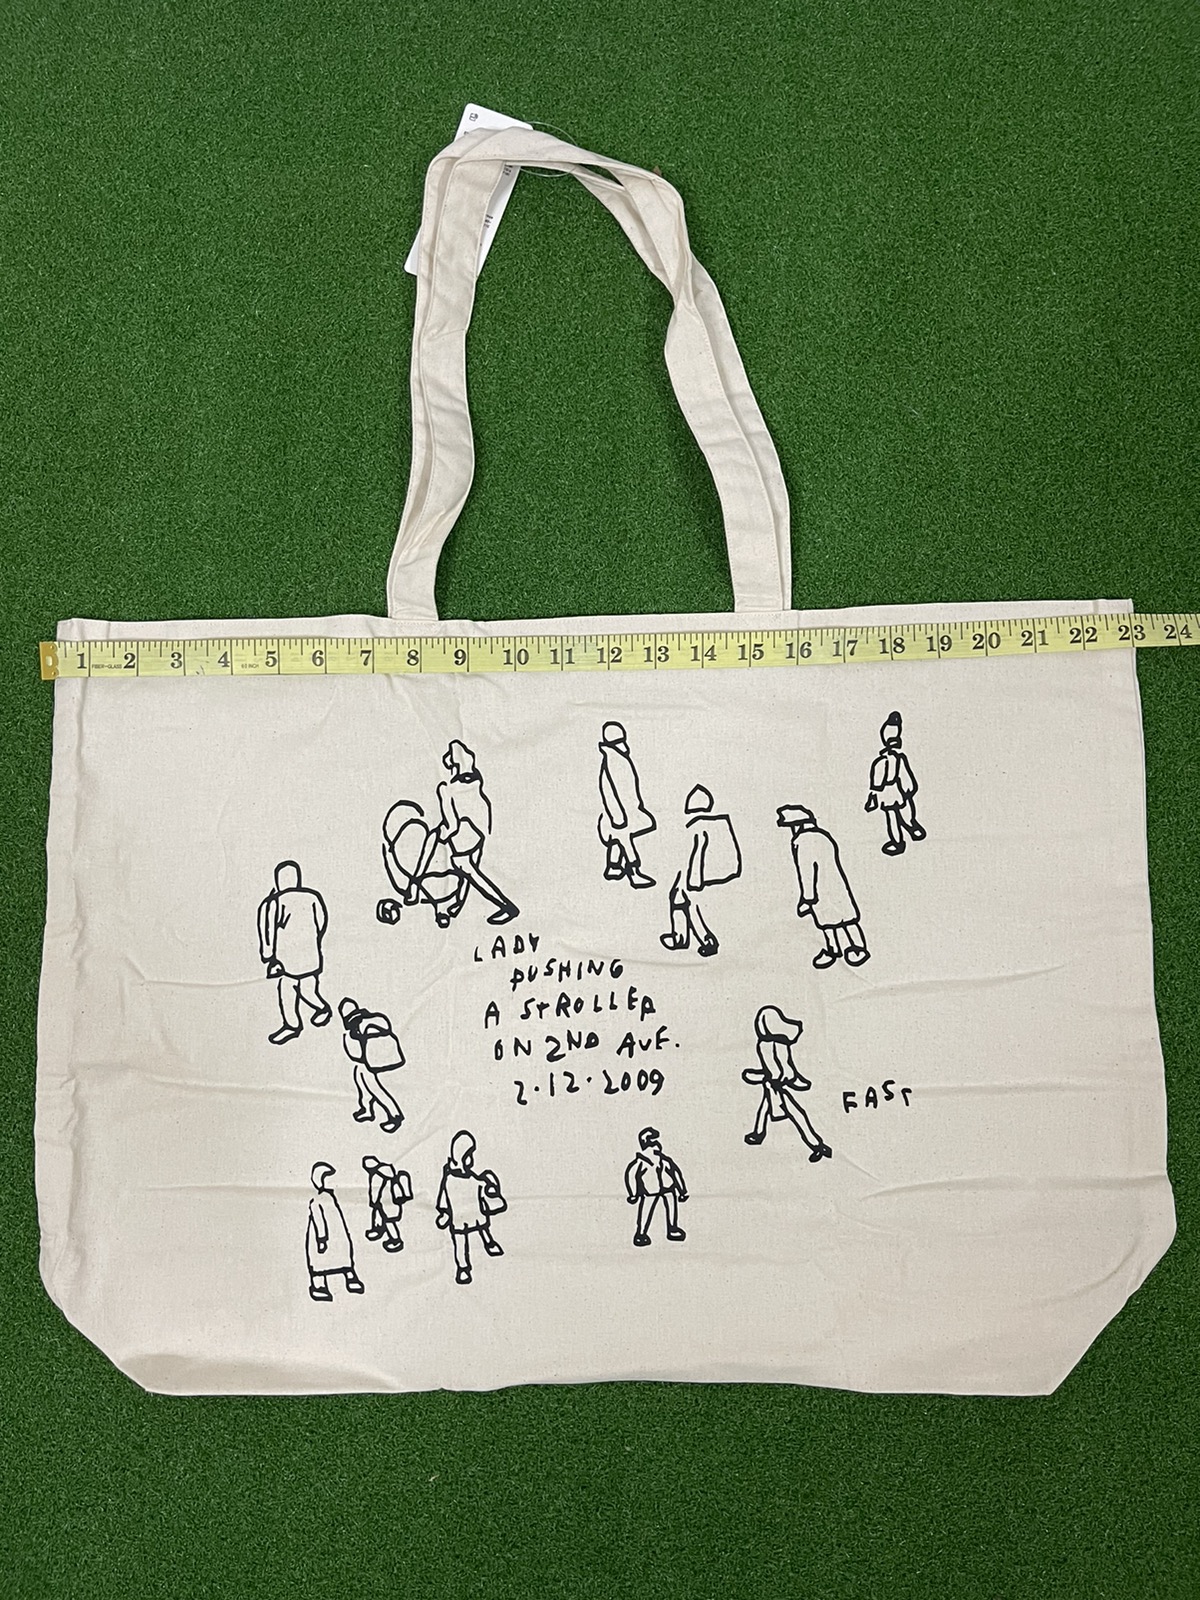 Outdoor Style Go Out! - New Jason Polan Tote Bag Limited Edition / Uniqlo / Eva - 13